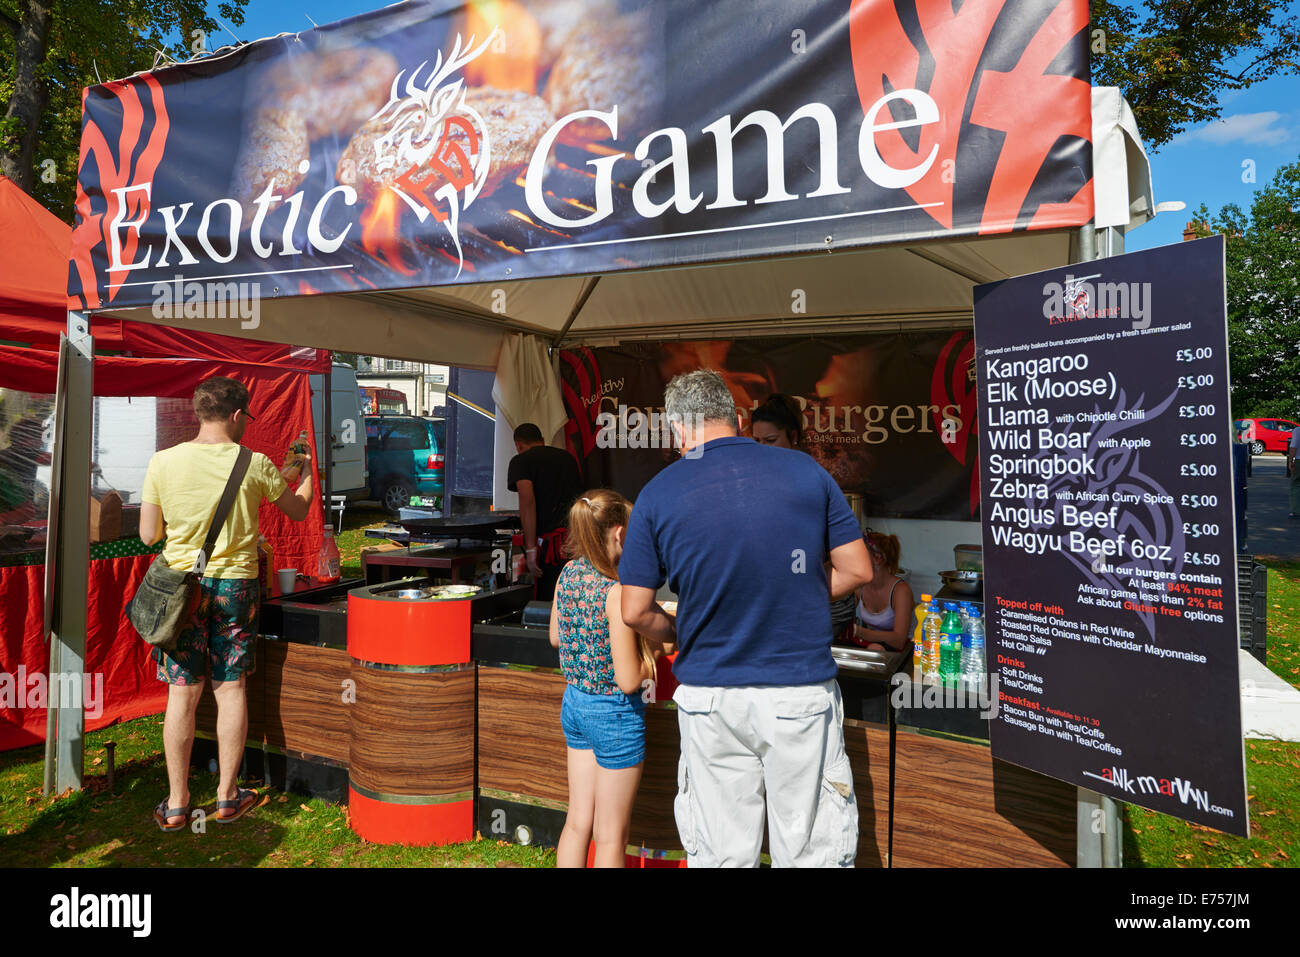 Stall Selling Exotic Game Meat Burgers At The Food And Drink Festival Leamington Spa Warwickshire UK Stock Photo